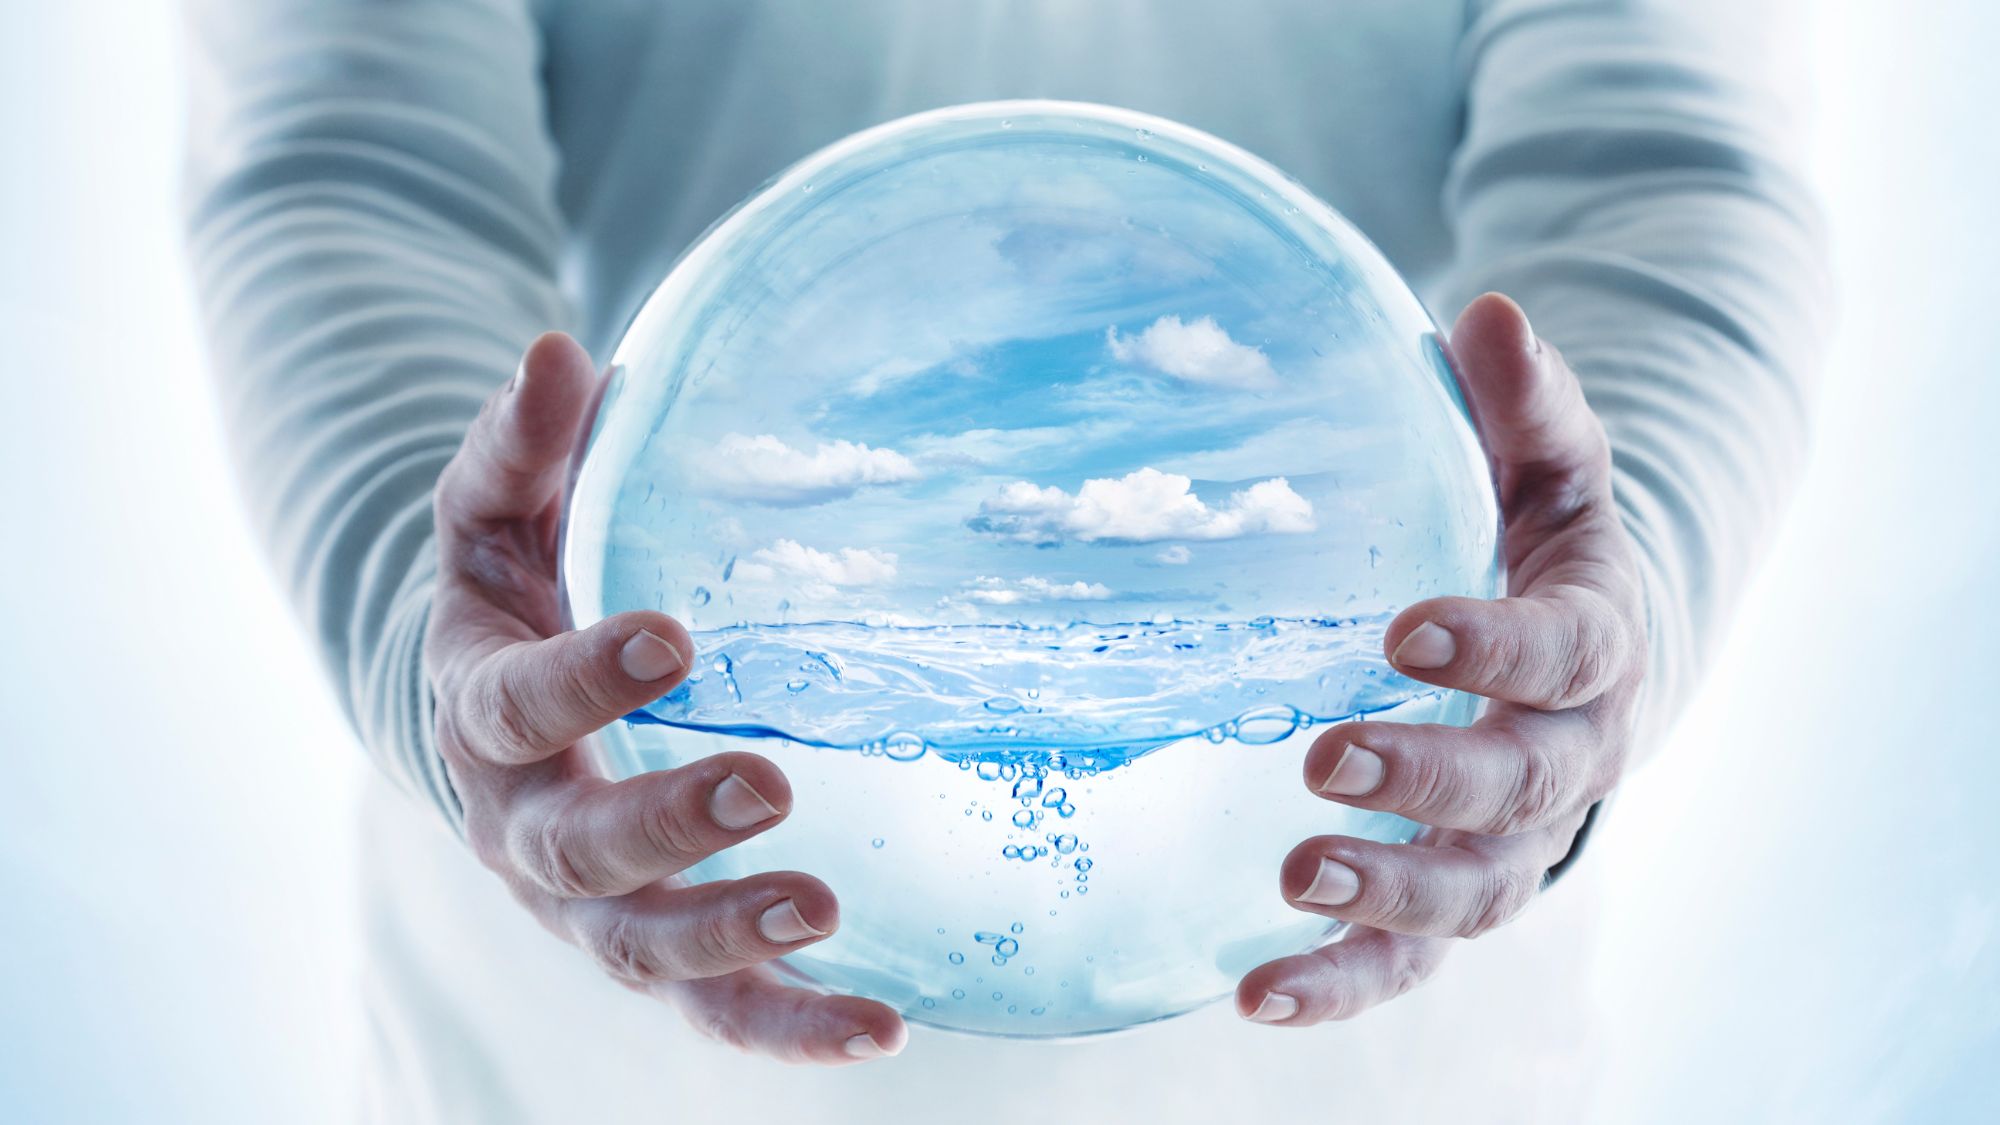 Person holding clear globe with water and sky inside